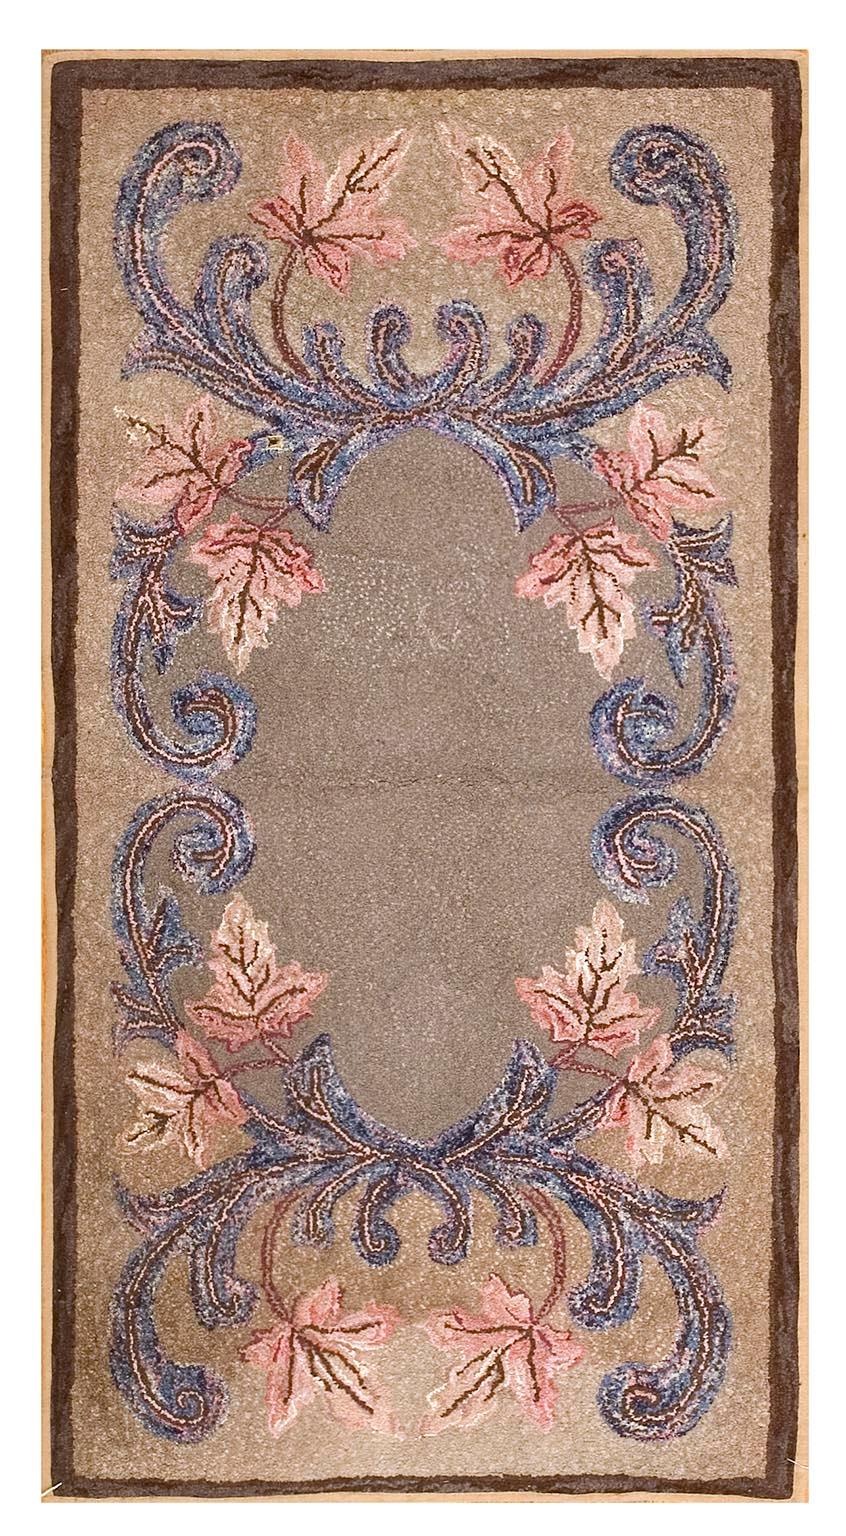 Antique American Hooked Rug 2' 6